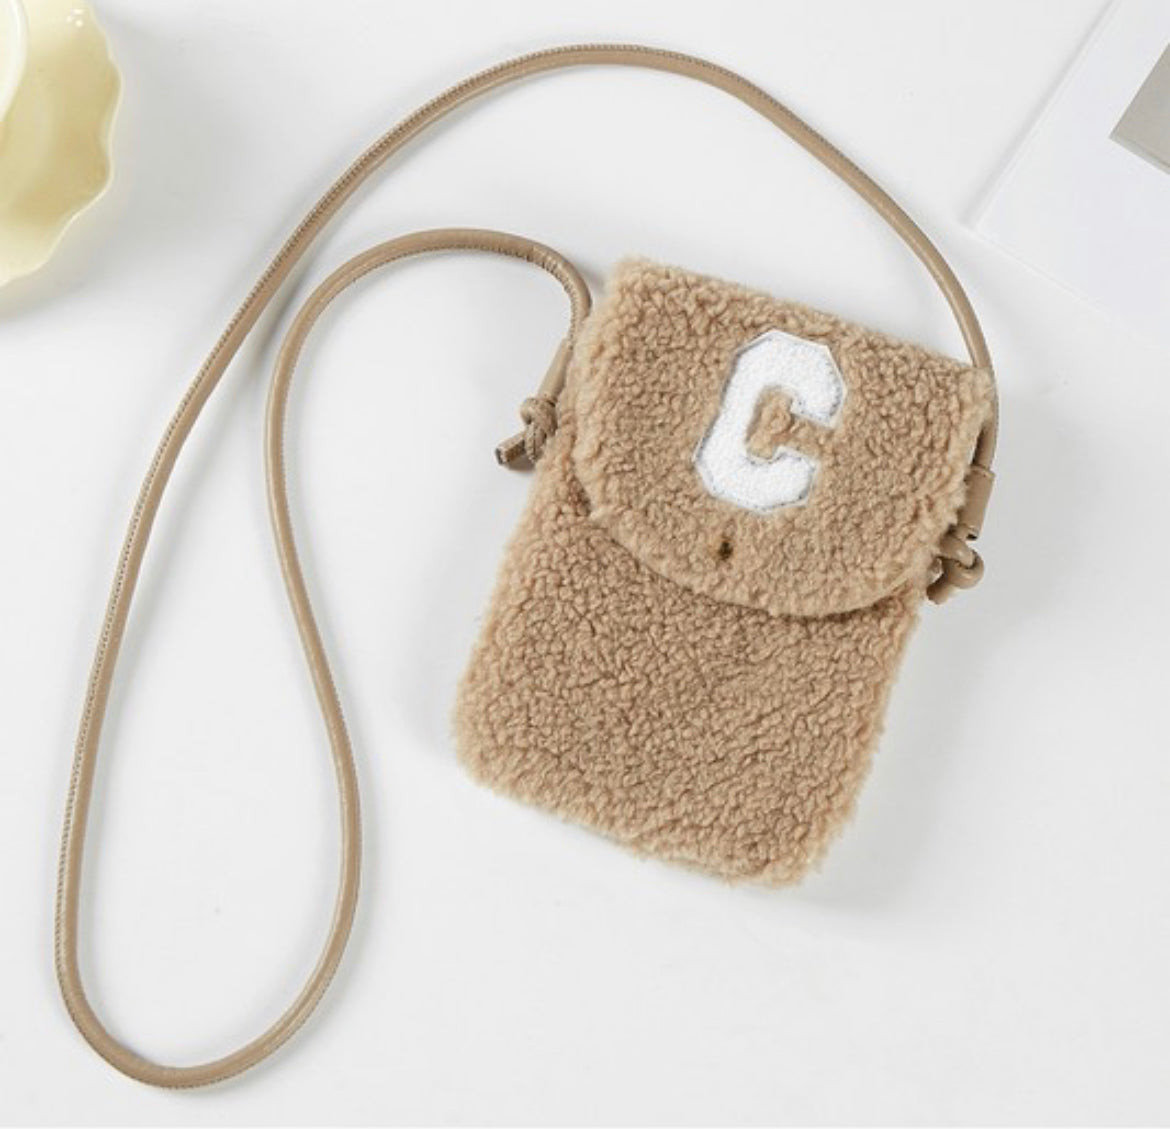 The “COLLECTOR” Sherpa Cross Body  Bag